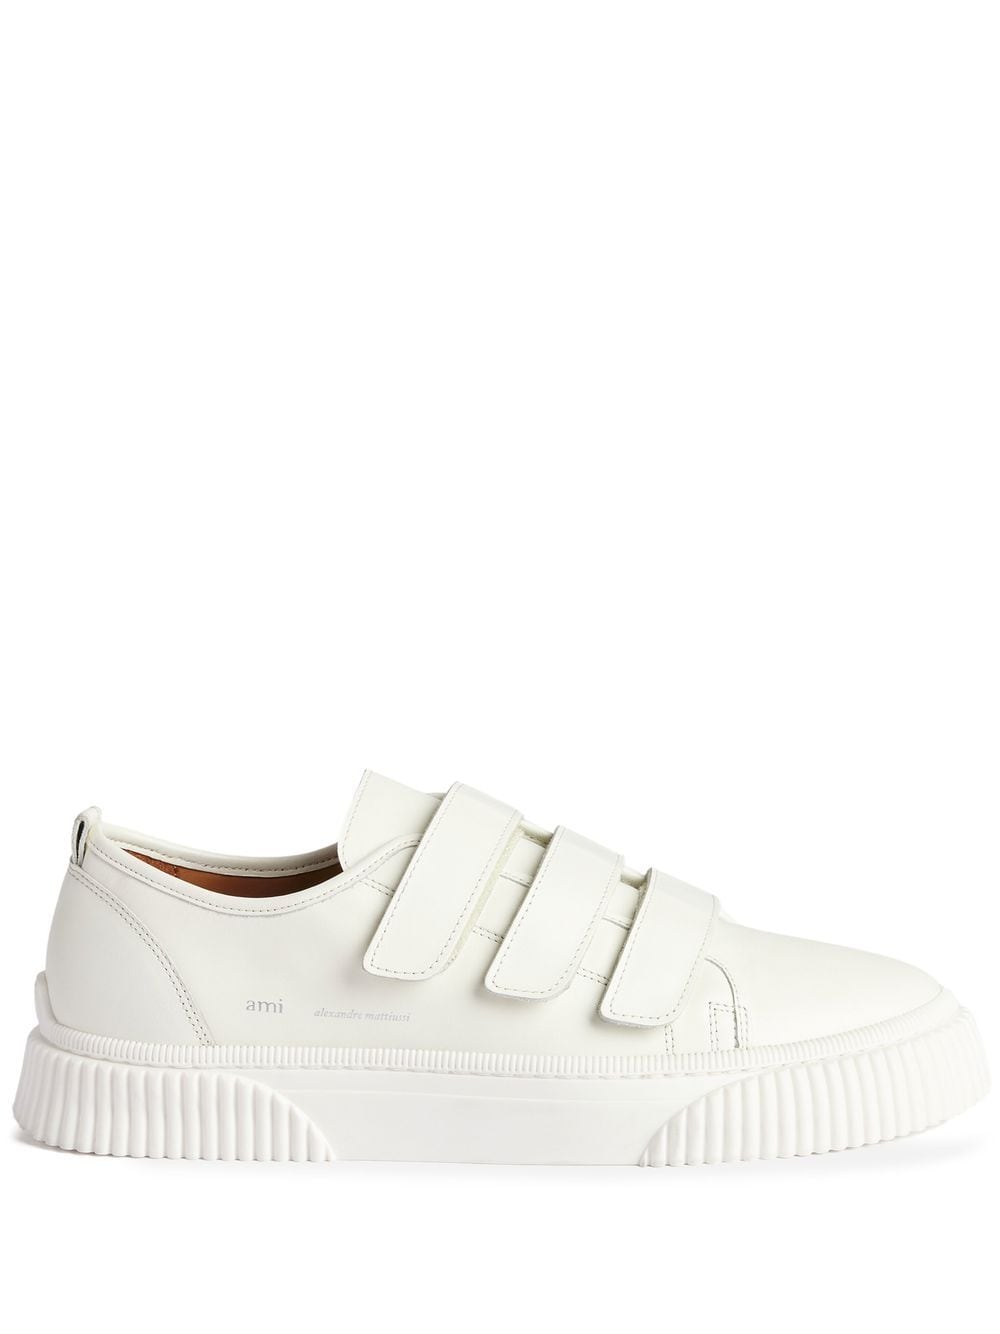 AMI Paris touch-strap low-top sneakers - White